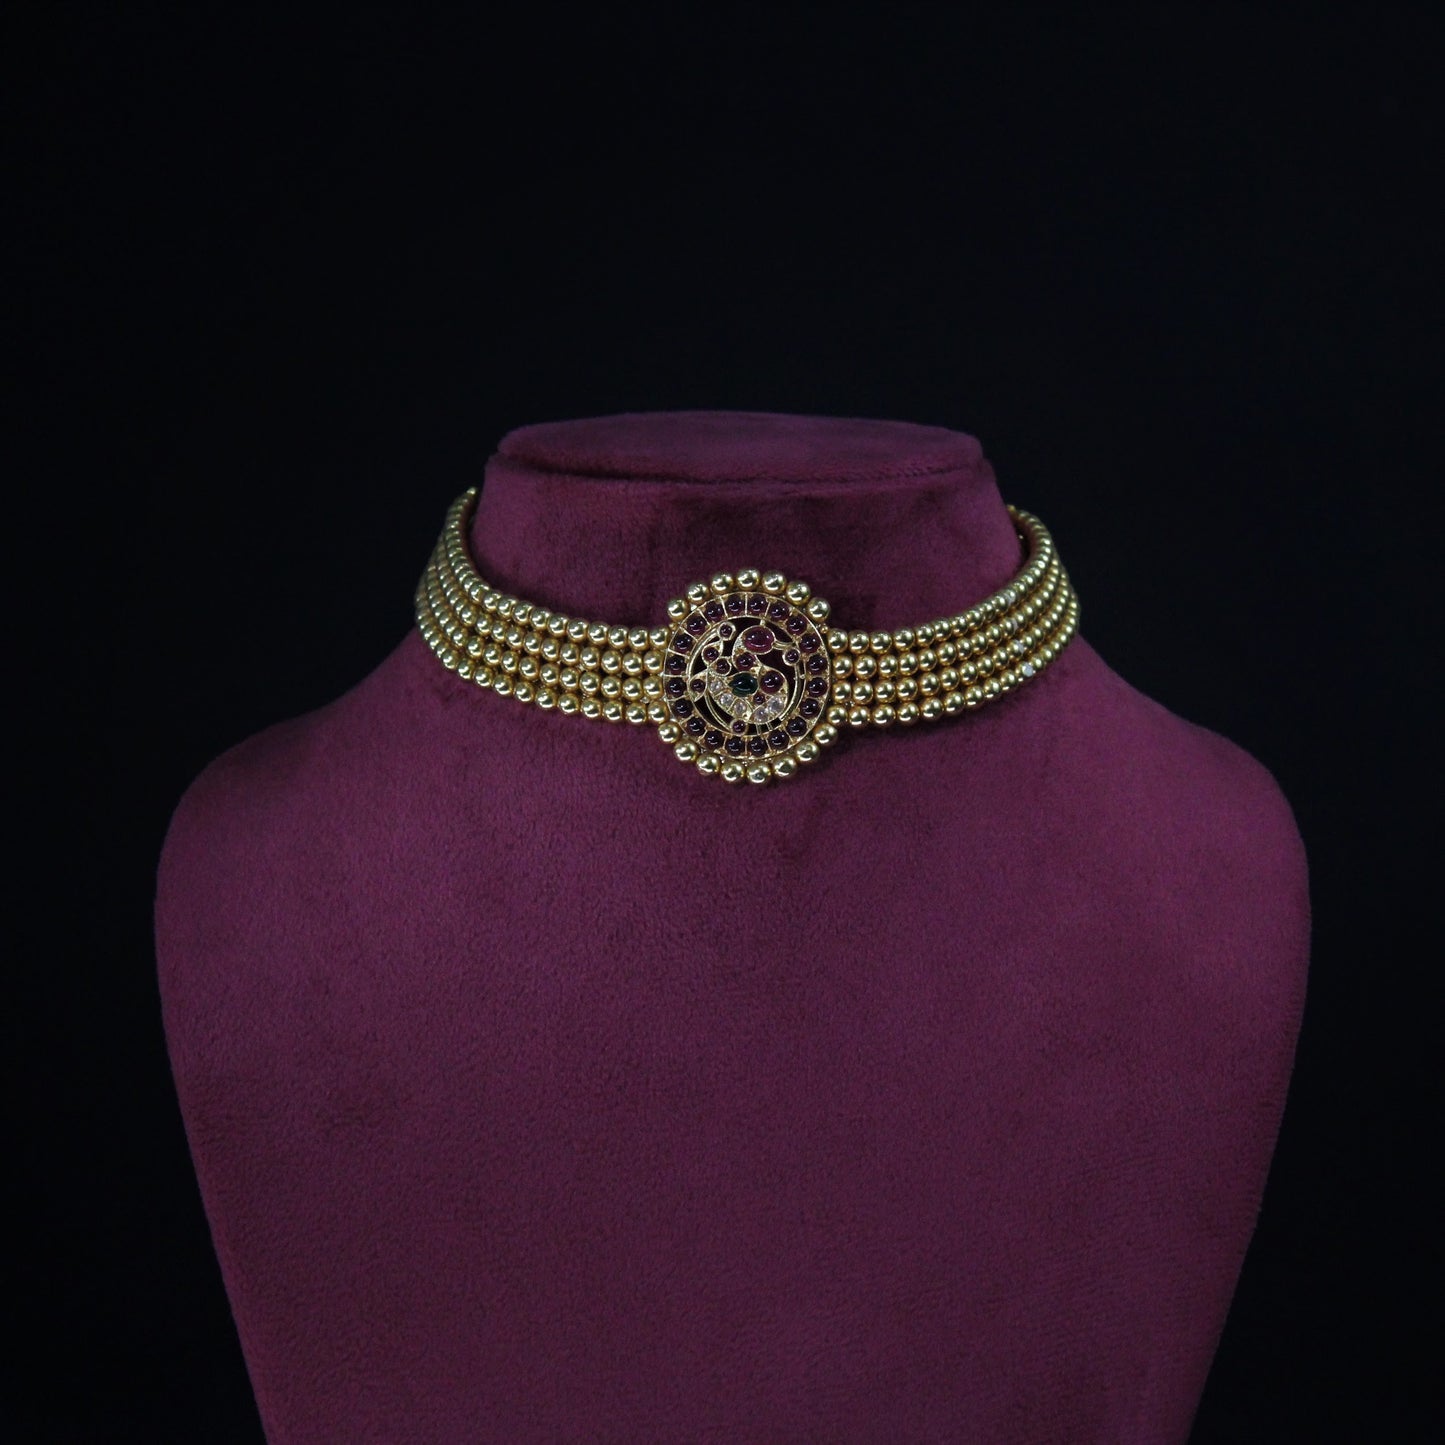 GOLD PLATED STERLING SILVER CHOKER IN SOUTH COLLECTIONS.